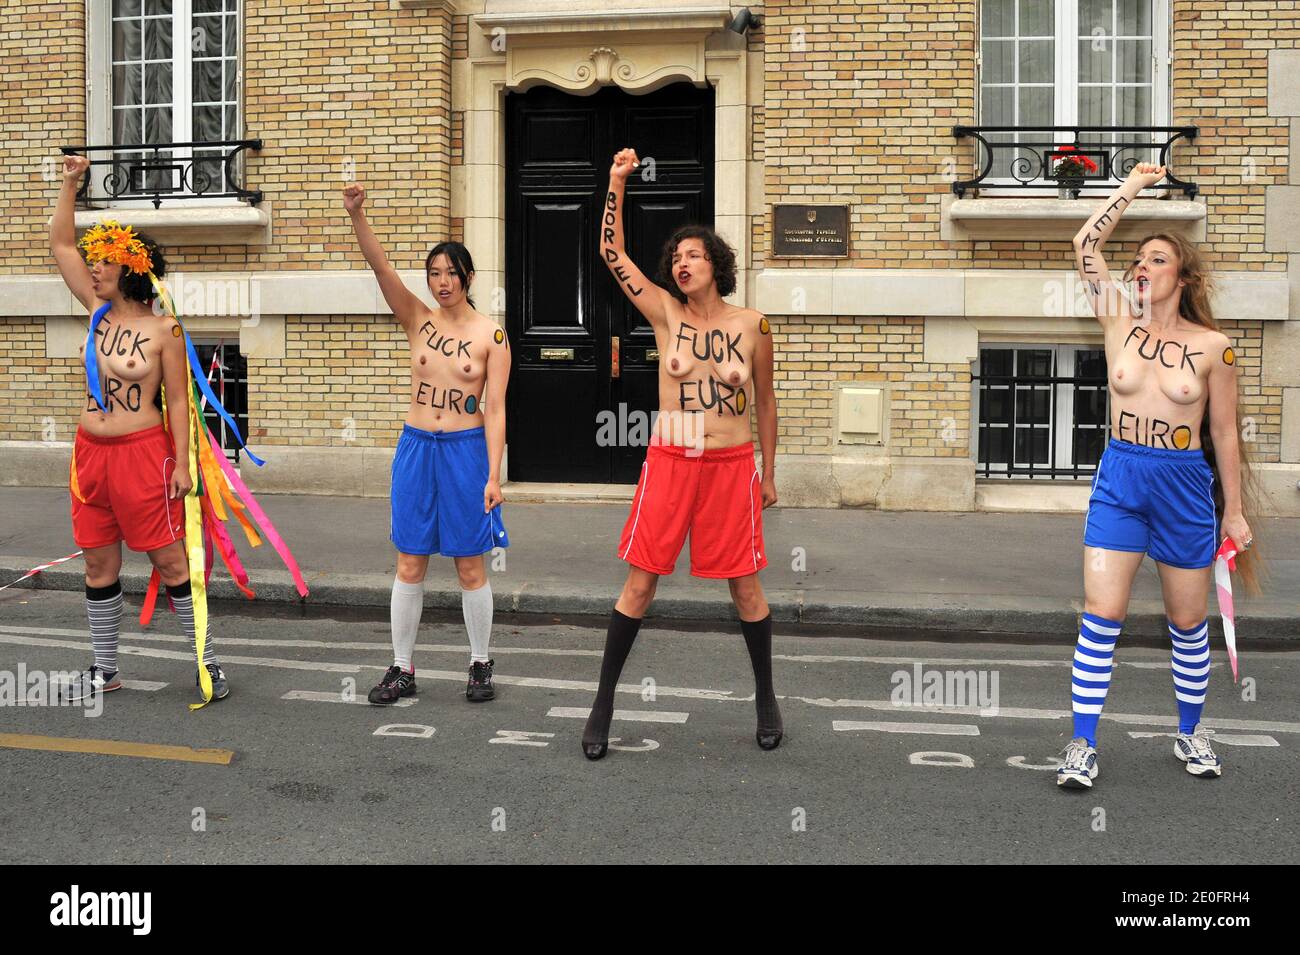 French members of Ukrainian feminist group Femen protest against  prostitution during the Euro 2012 football championships, outside the  Embassy of Ukraine in Paris, France on June 1, 2012. The protest was  organised